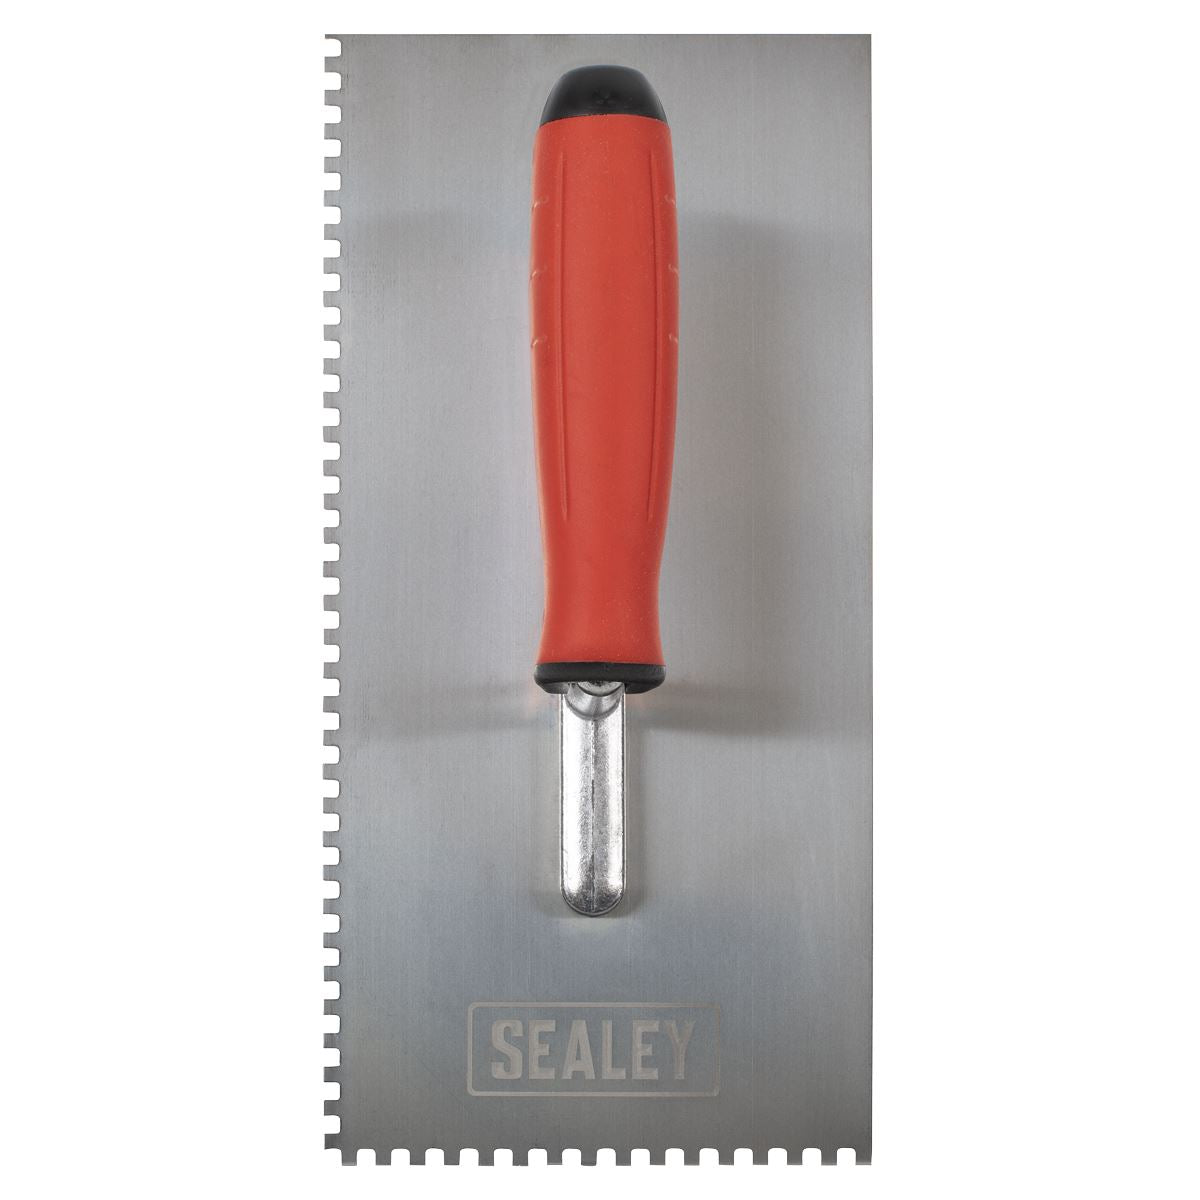 Sealey Stainless Steel 270mm Notched Trowel - Rubber Handle - 4mm